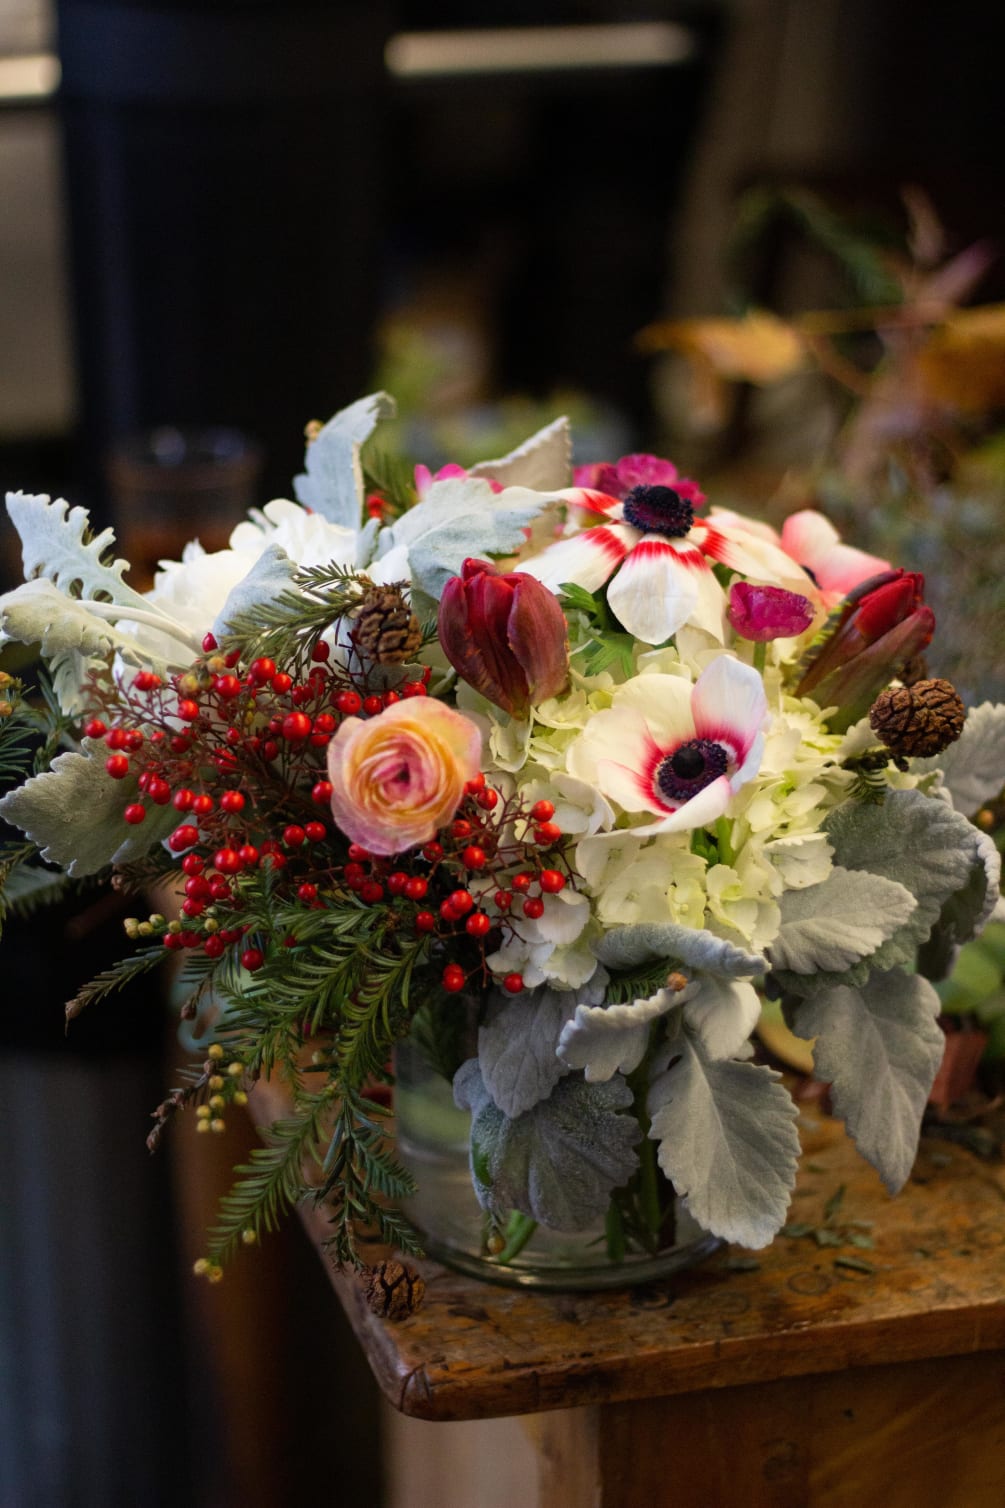 This bright arrangement is perfect for the winter or holiday season. We